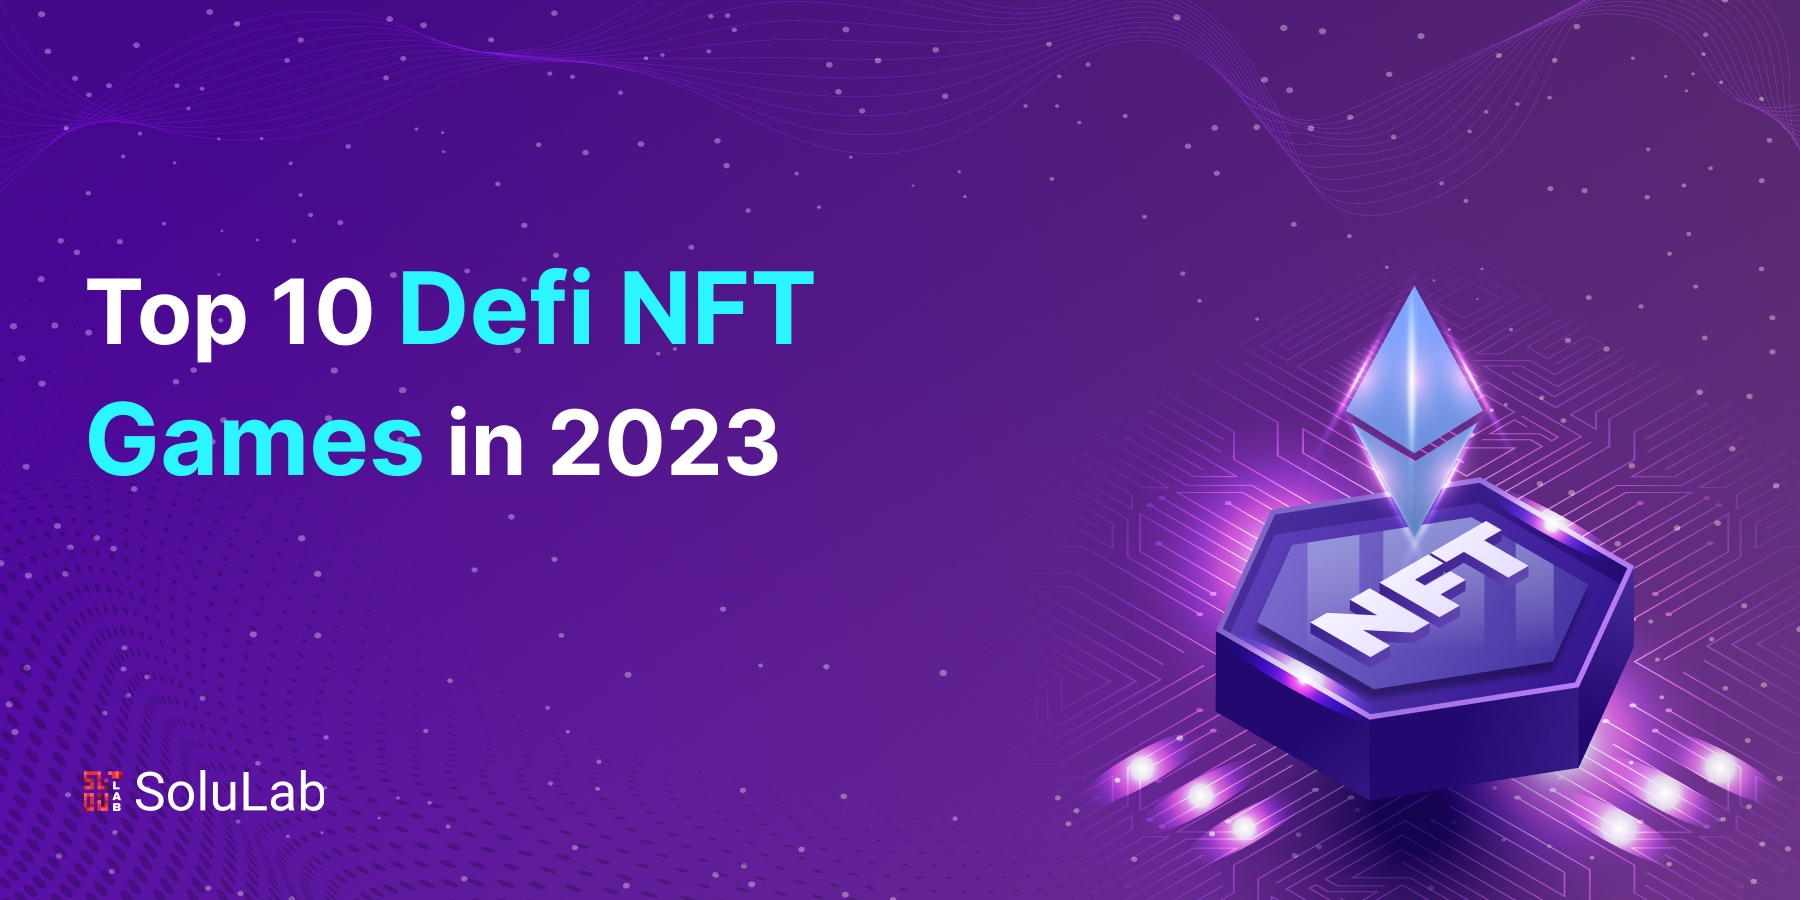 Top 10 Defi NFT Games to Look for in 2023